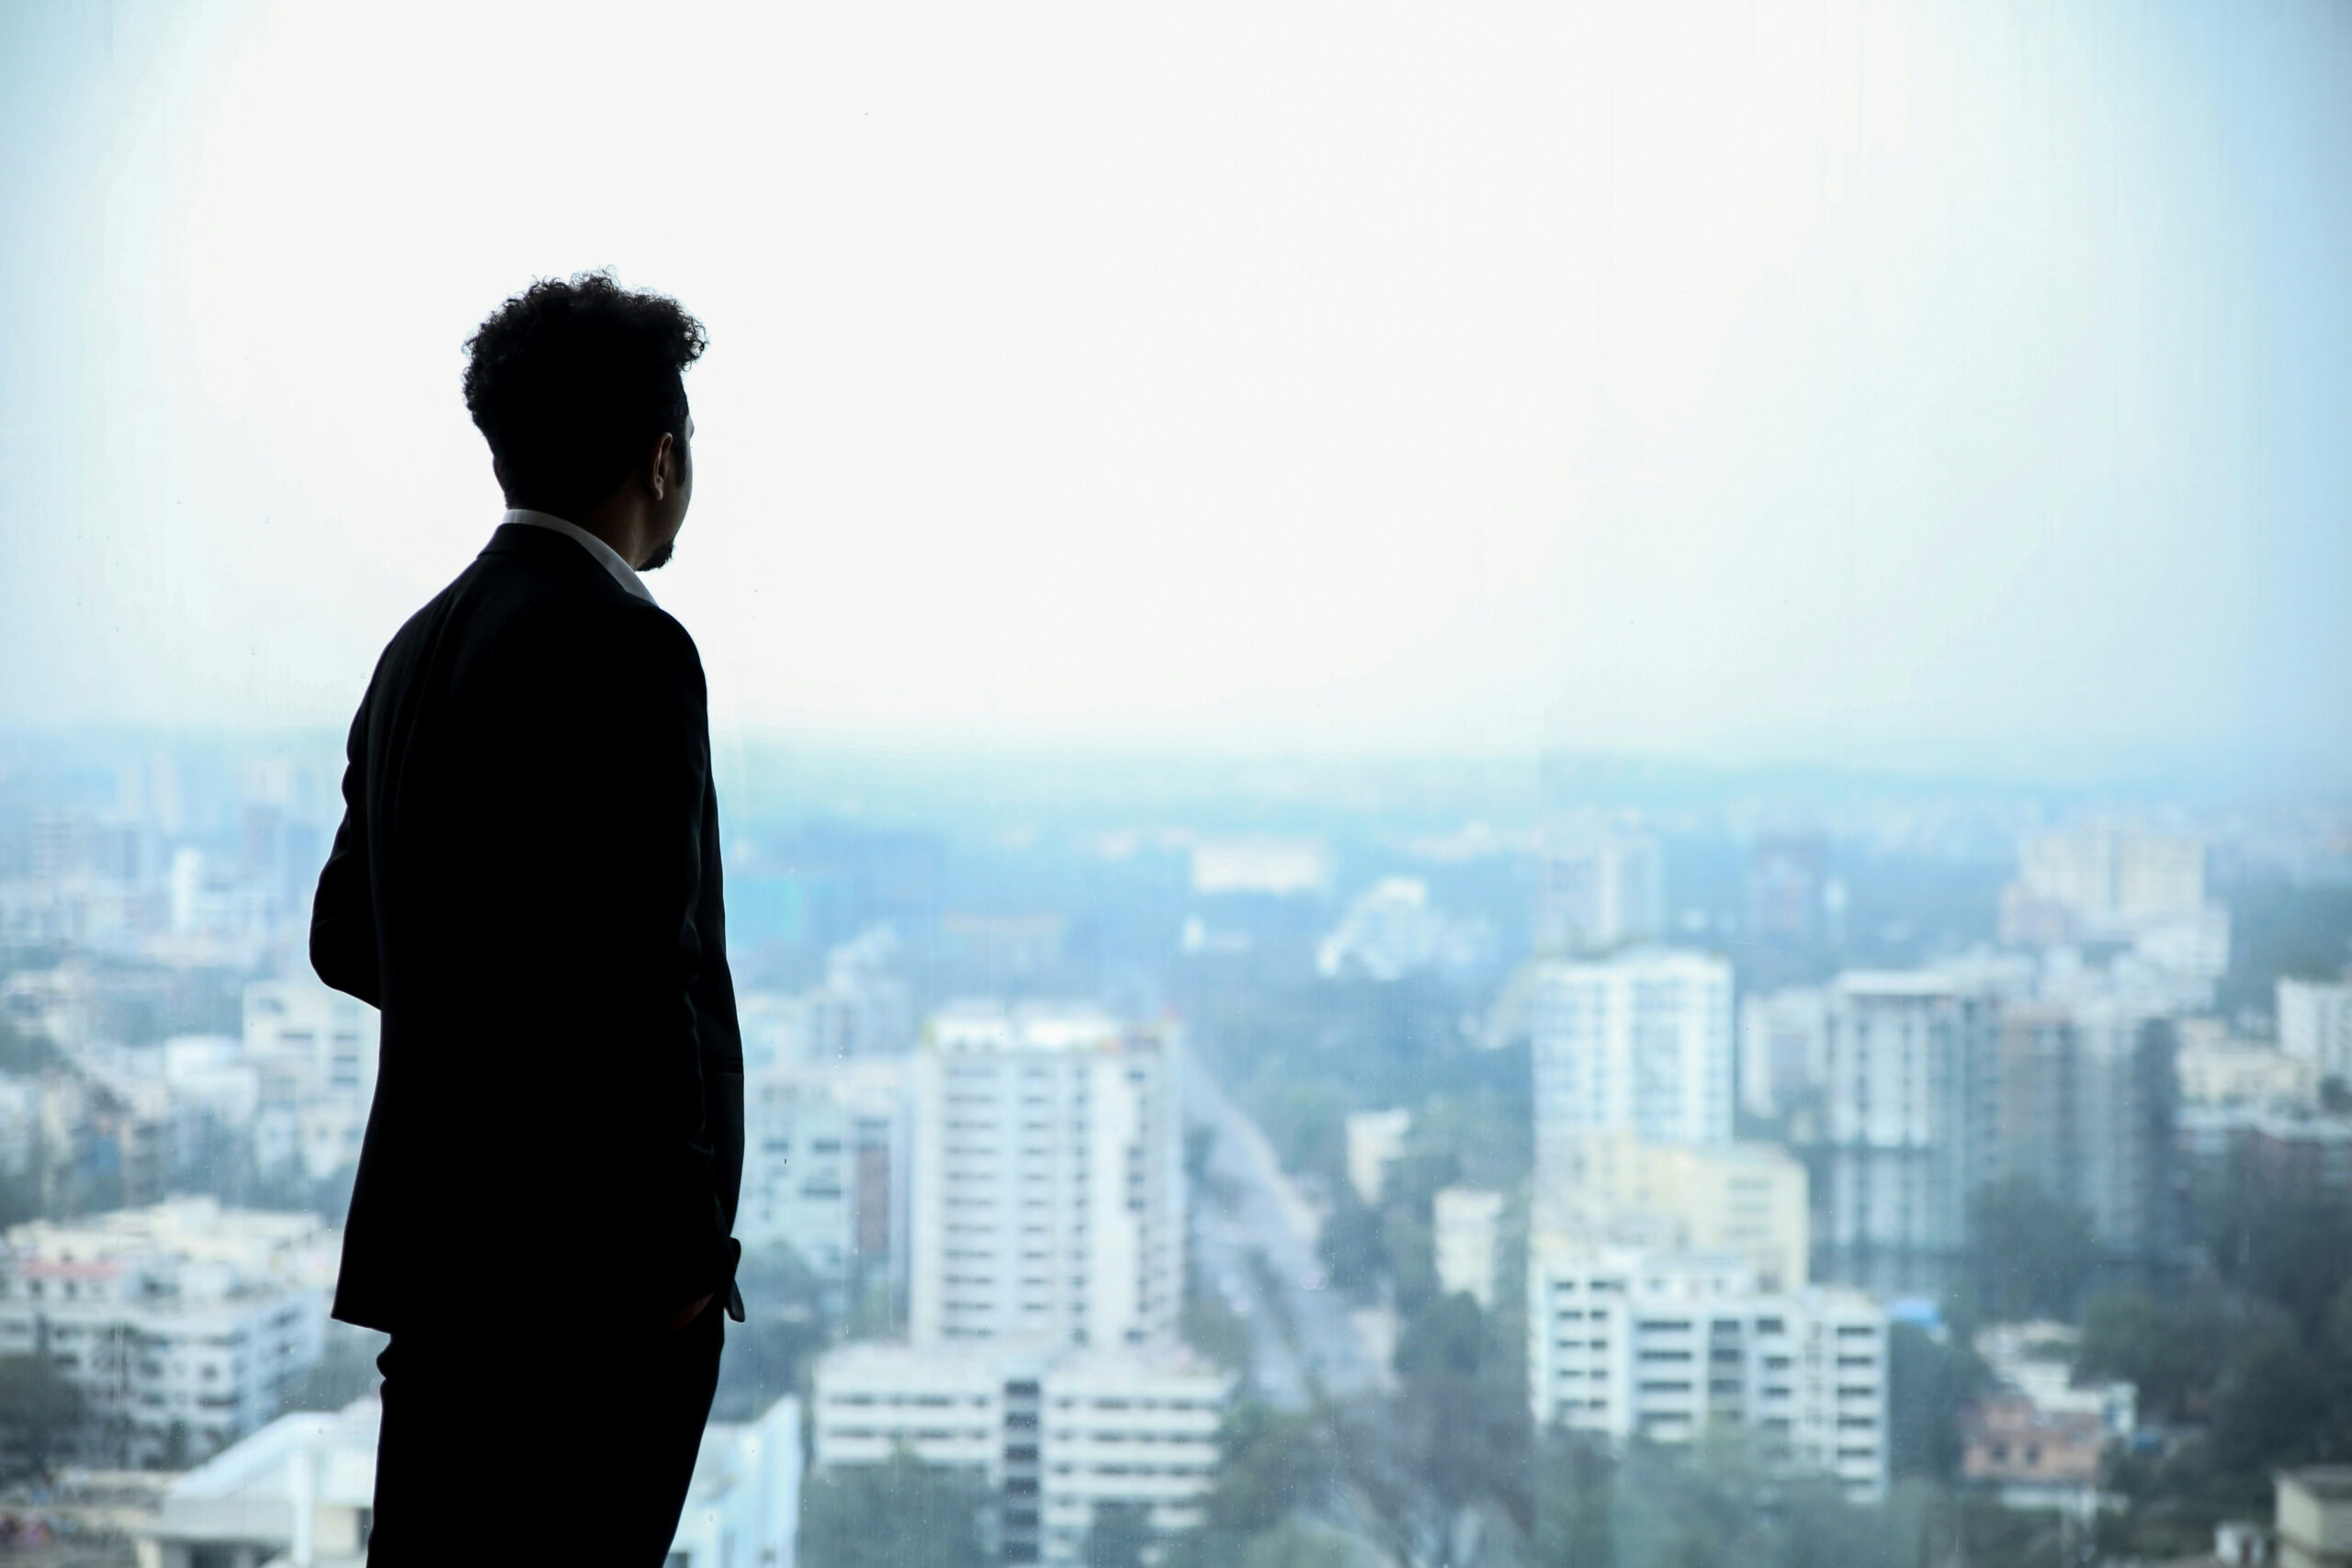 Person in silhouette wearing suit and looking out elevated window over a landscape with buildings and a cloudy sky.